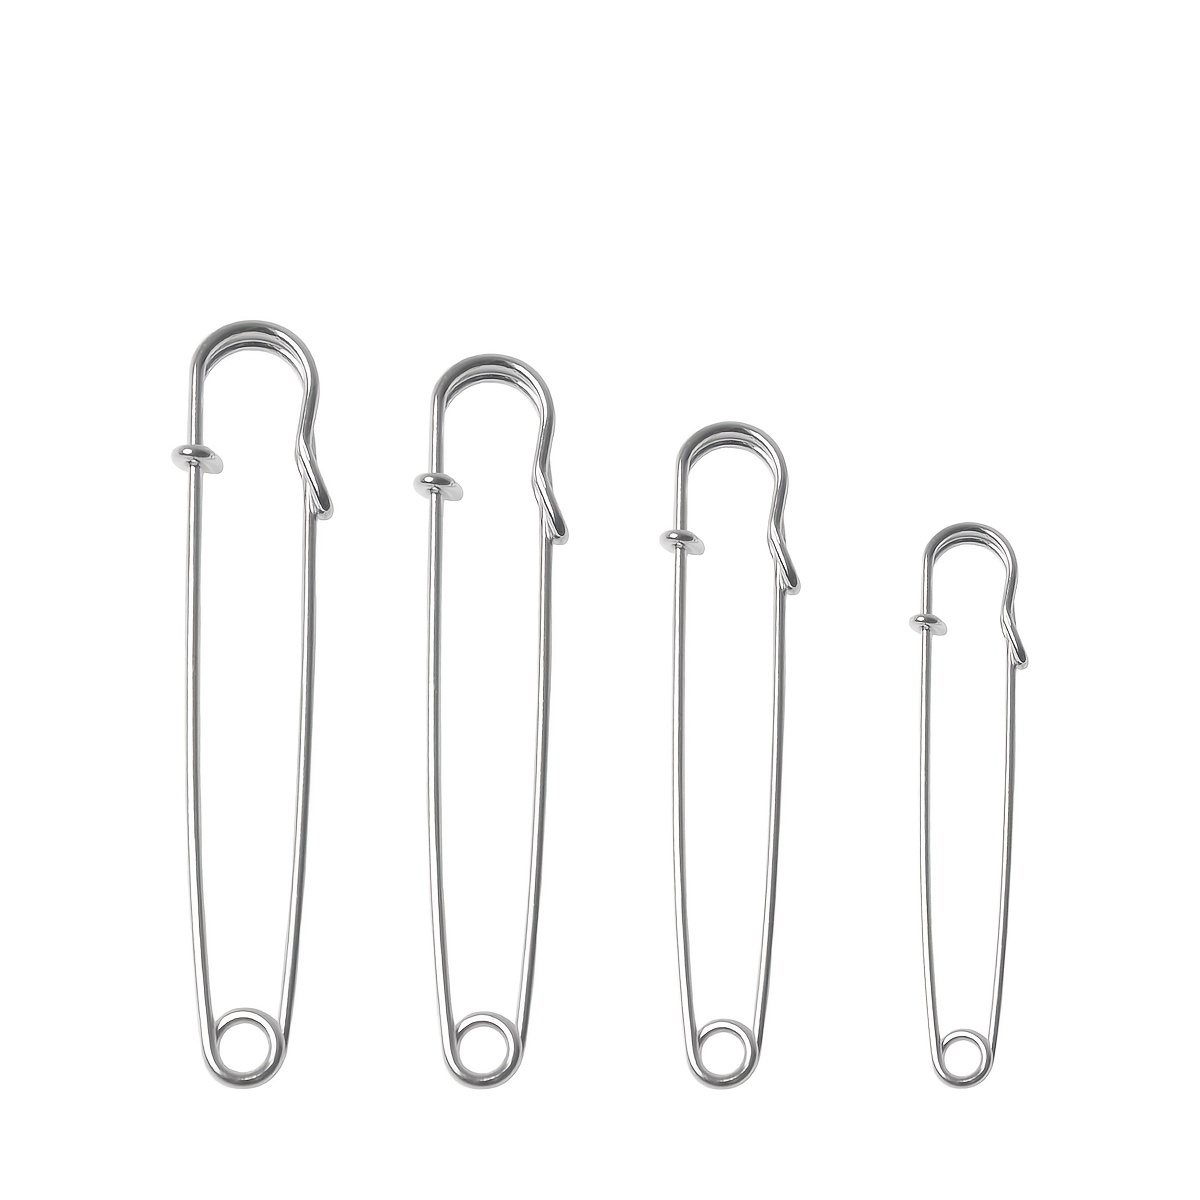  Urmspst Safety Pins (Upgraded), 4 Large Safety Pins Pack of 15  for Clothes Leather Canvas Blankets Crafts Skirts Kilts, Extra Large Safety  Pin Heavy Duty Safety Pins (Black)